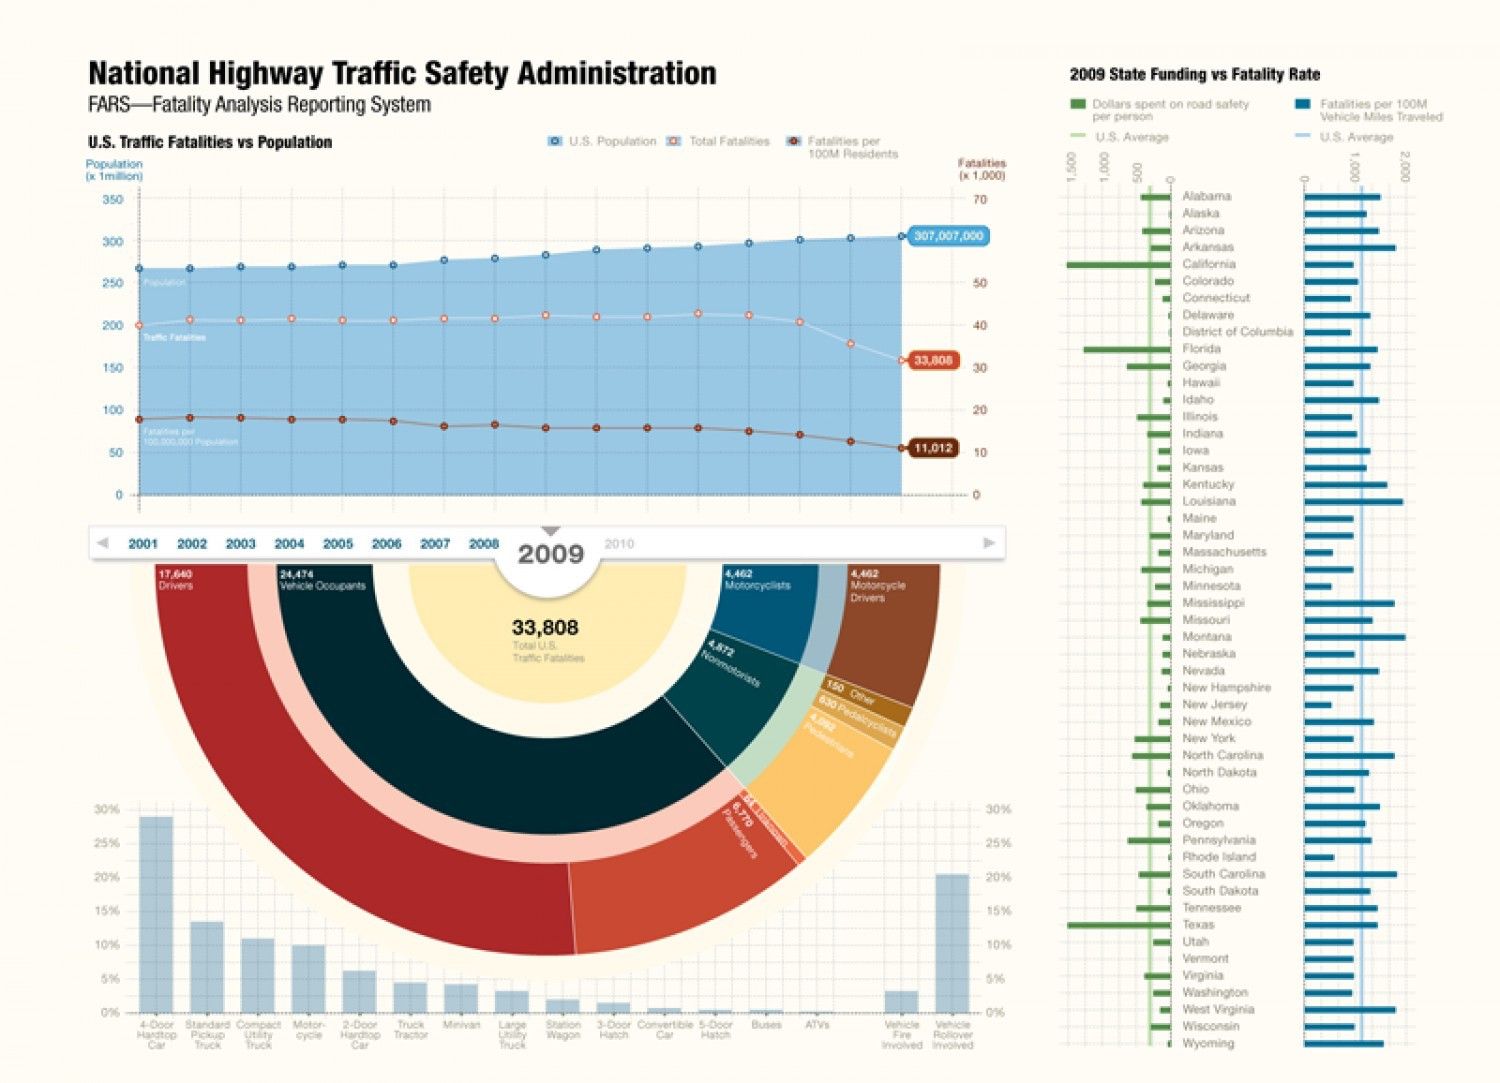 FARS - The Fatality Analysis Reporting system tracks traffic deaths in the US